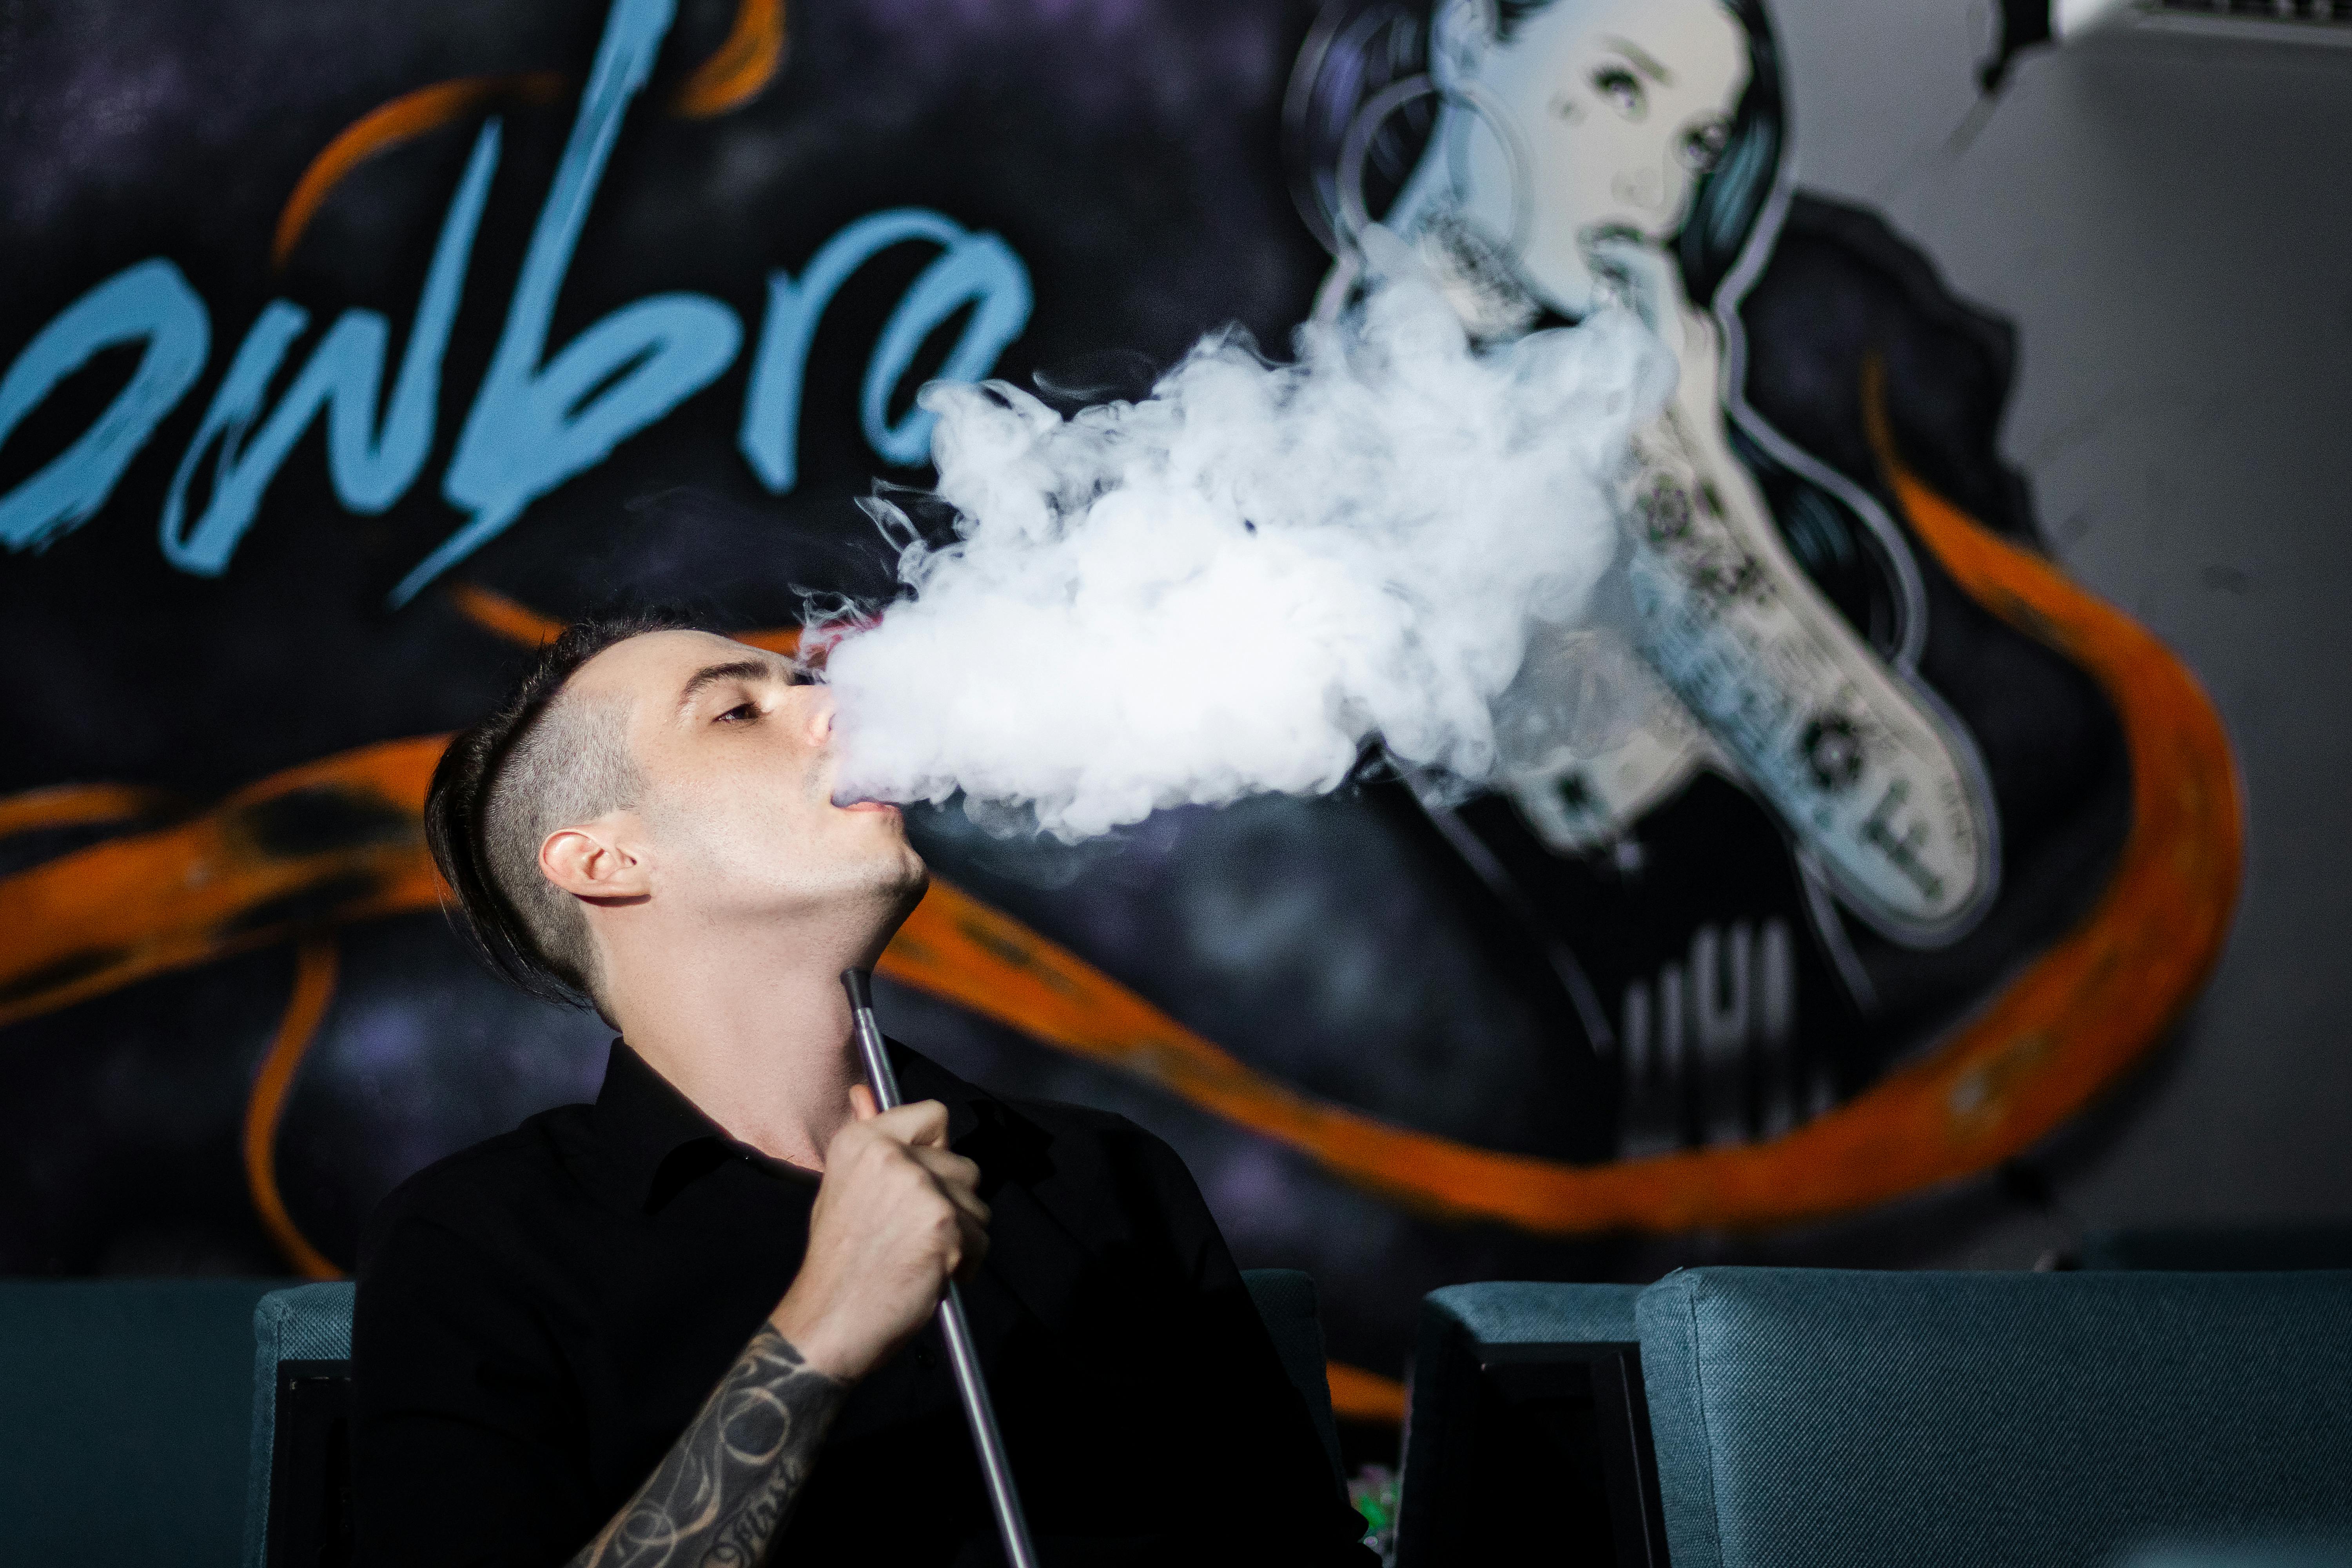 5 Amazing Tips to Make Your Party More Interesting | Ensure It’s Vaping Friendly